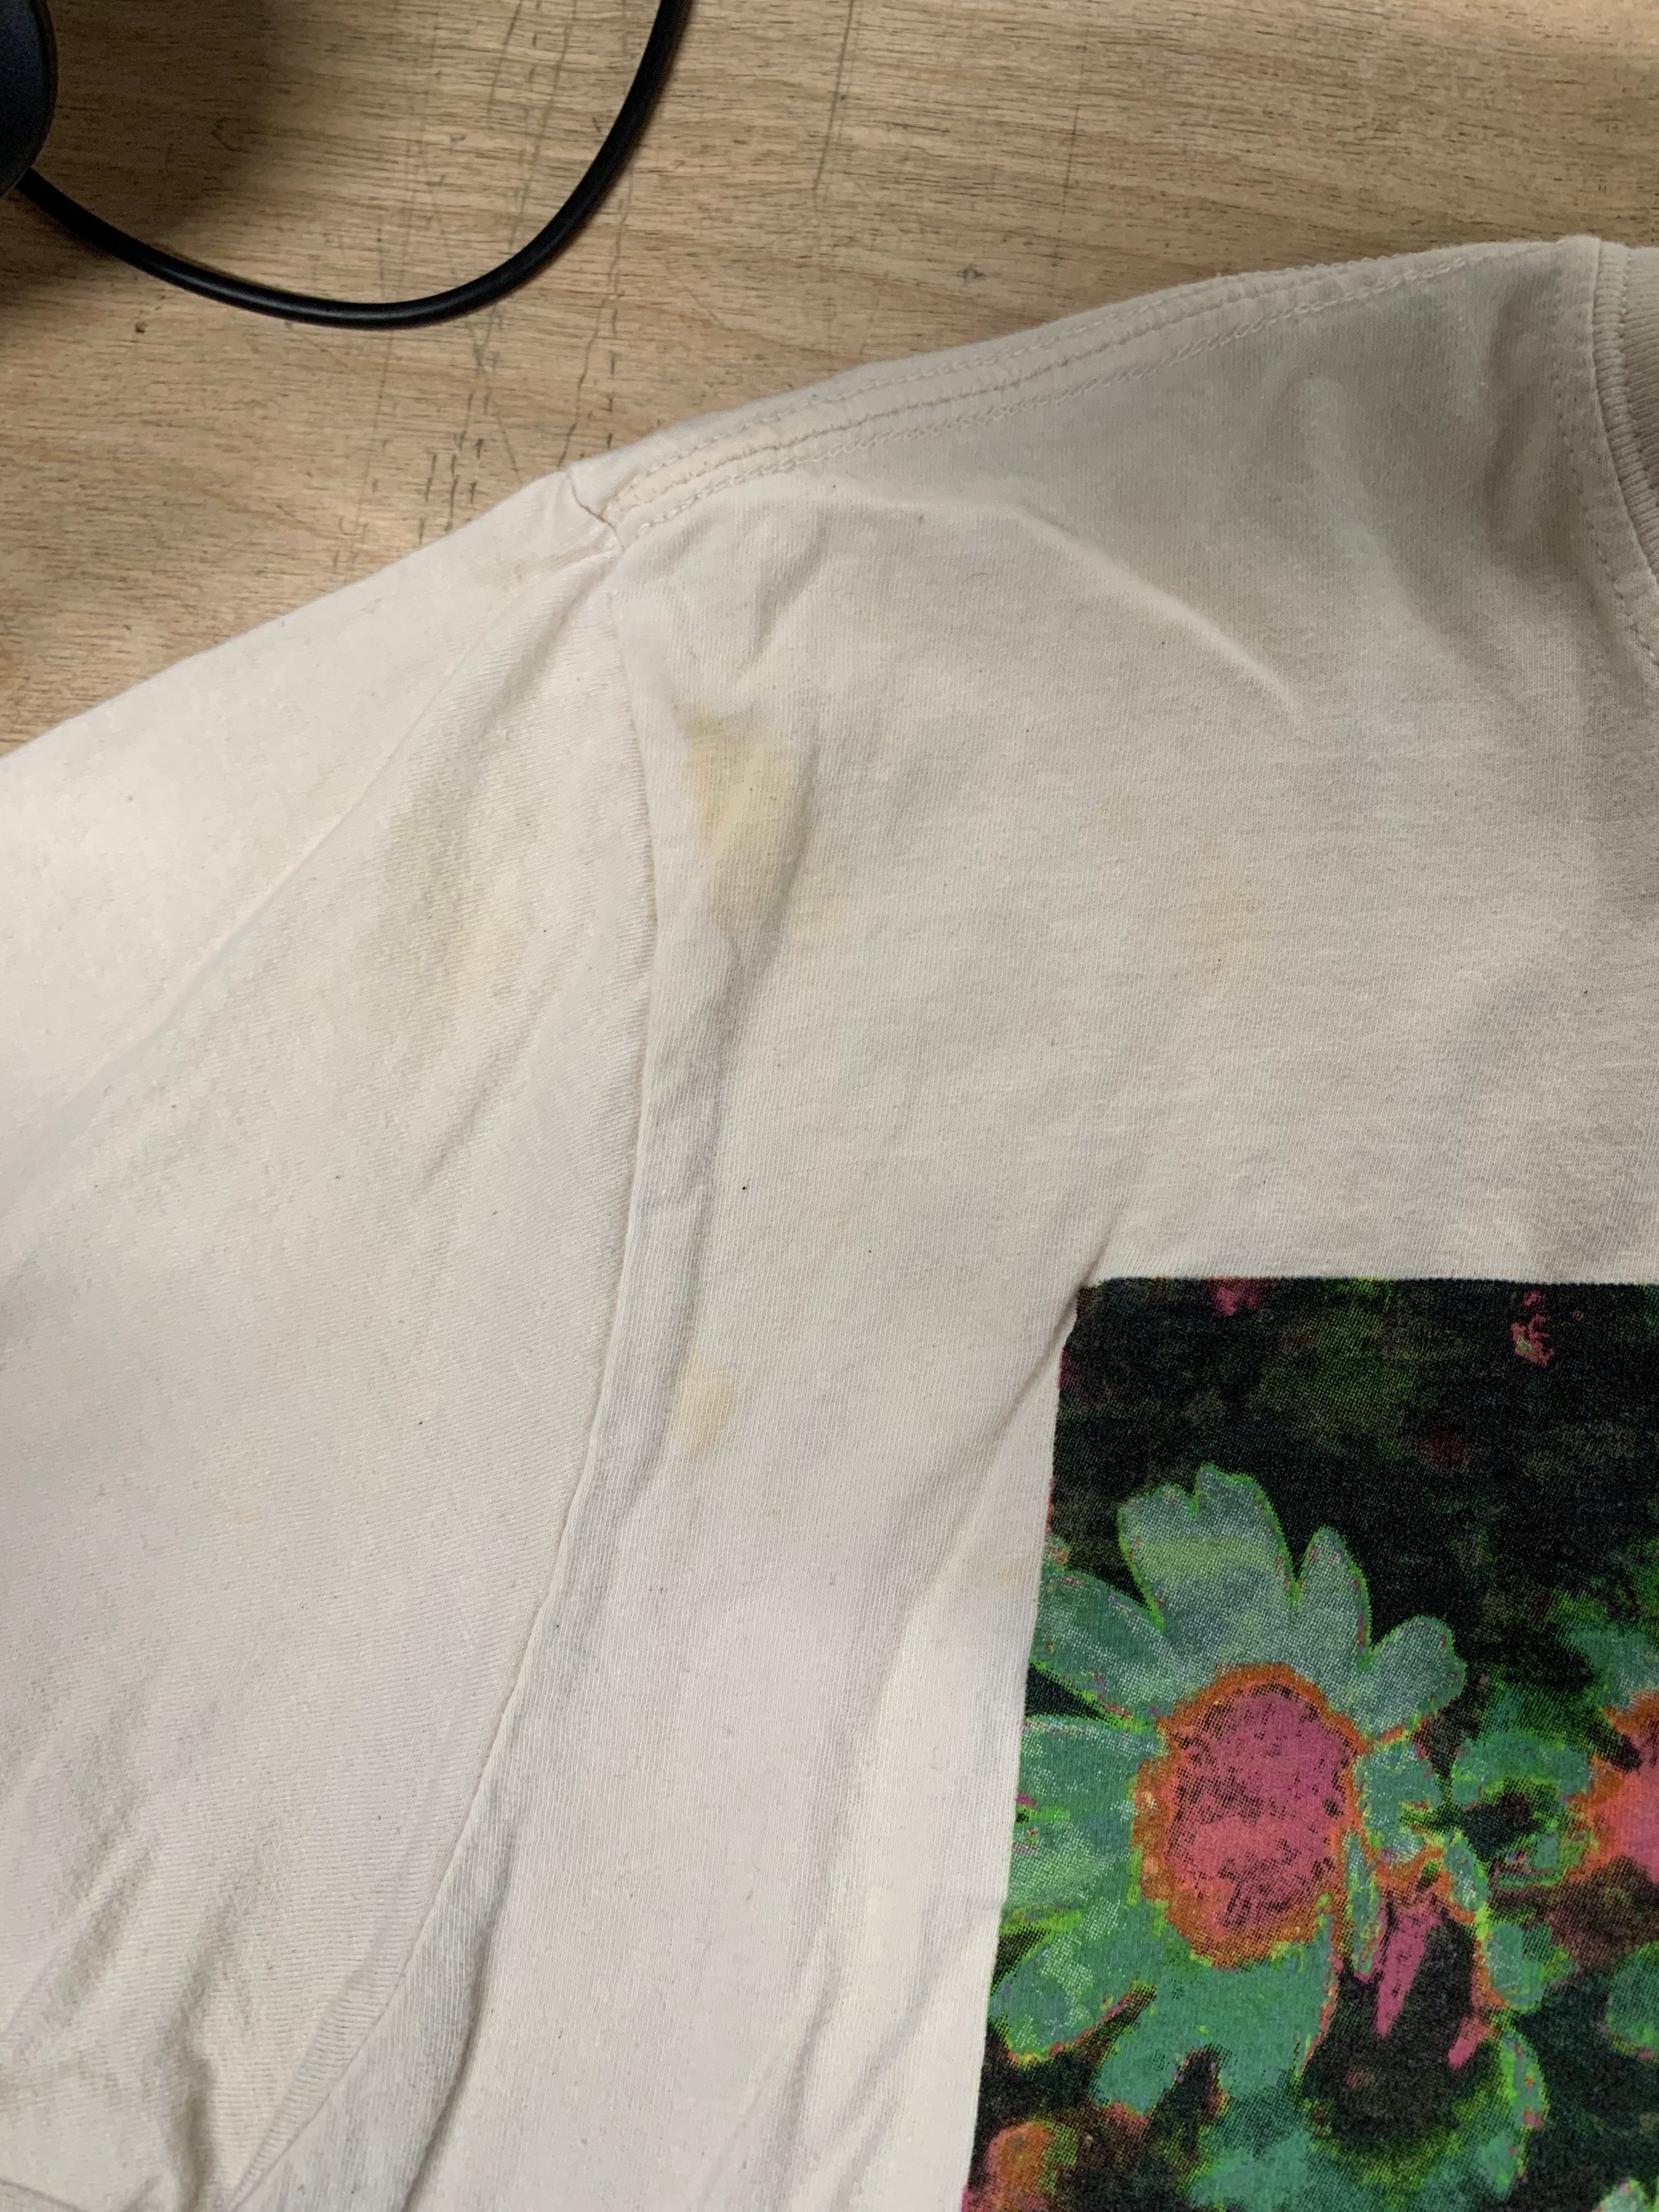 The 1975 Flower T-shirt, White W/ Minor Staining (SEE DESCRIPTION), L